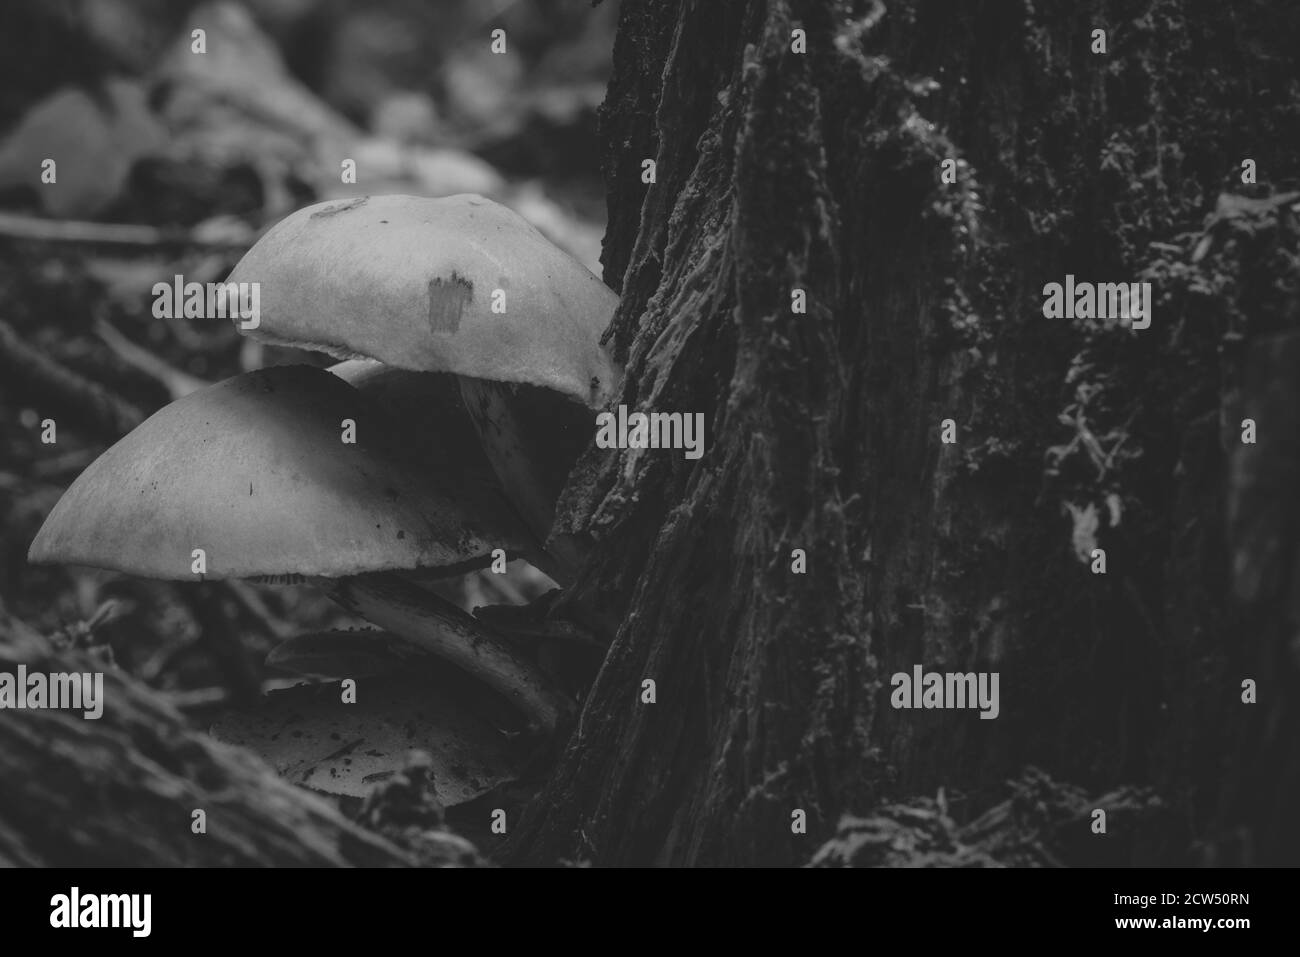 mushrooms on a tree trunk, mushrooms artistically photographed, silky contrast, black and white photo Stock Photo